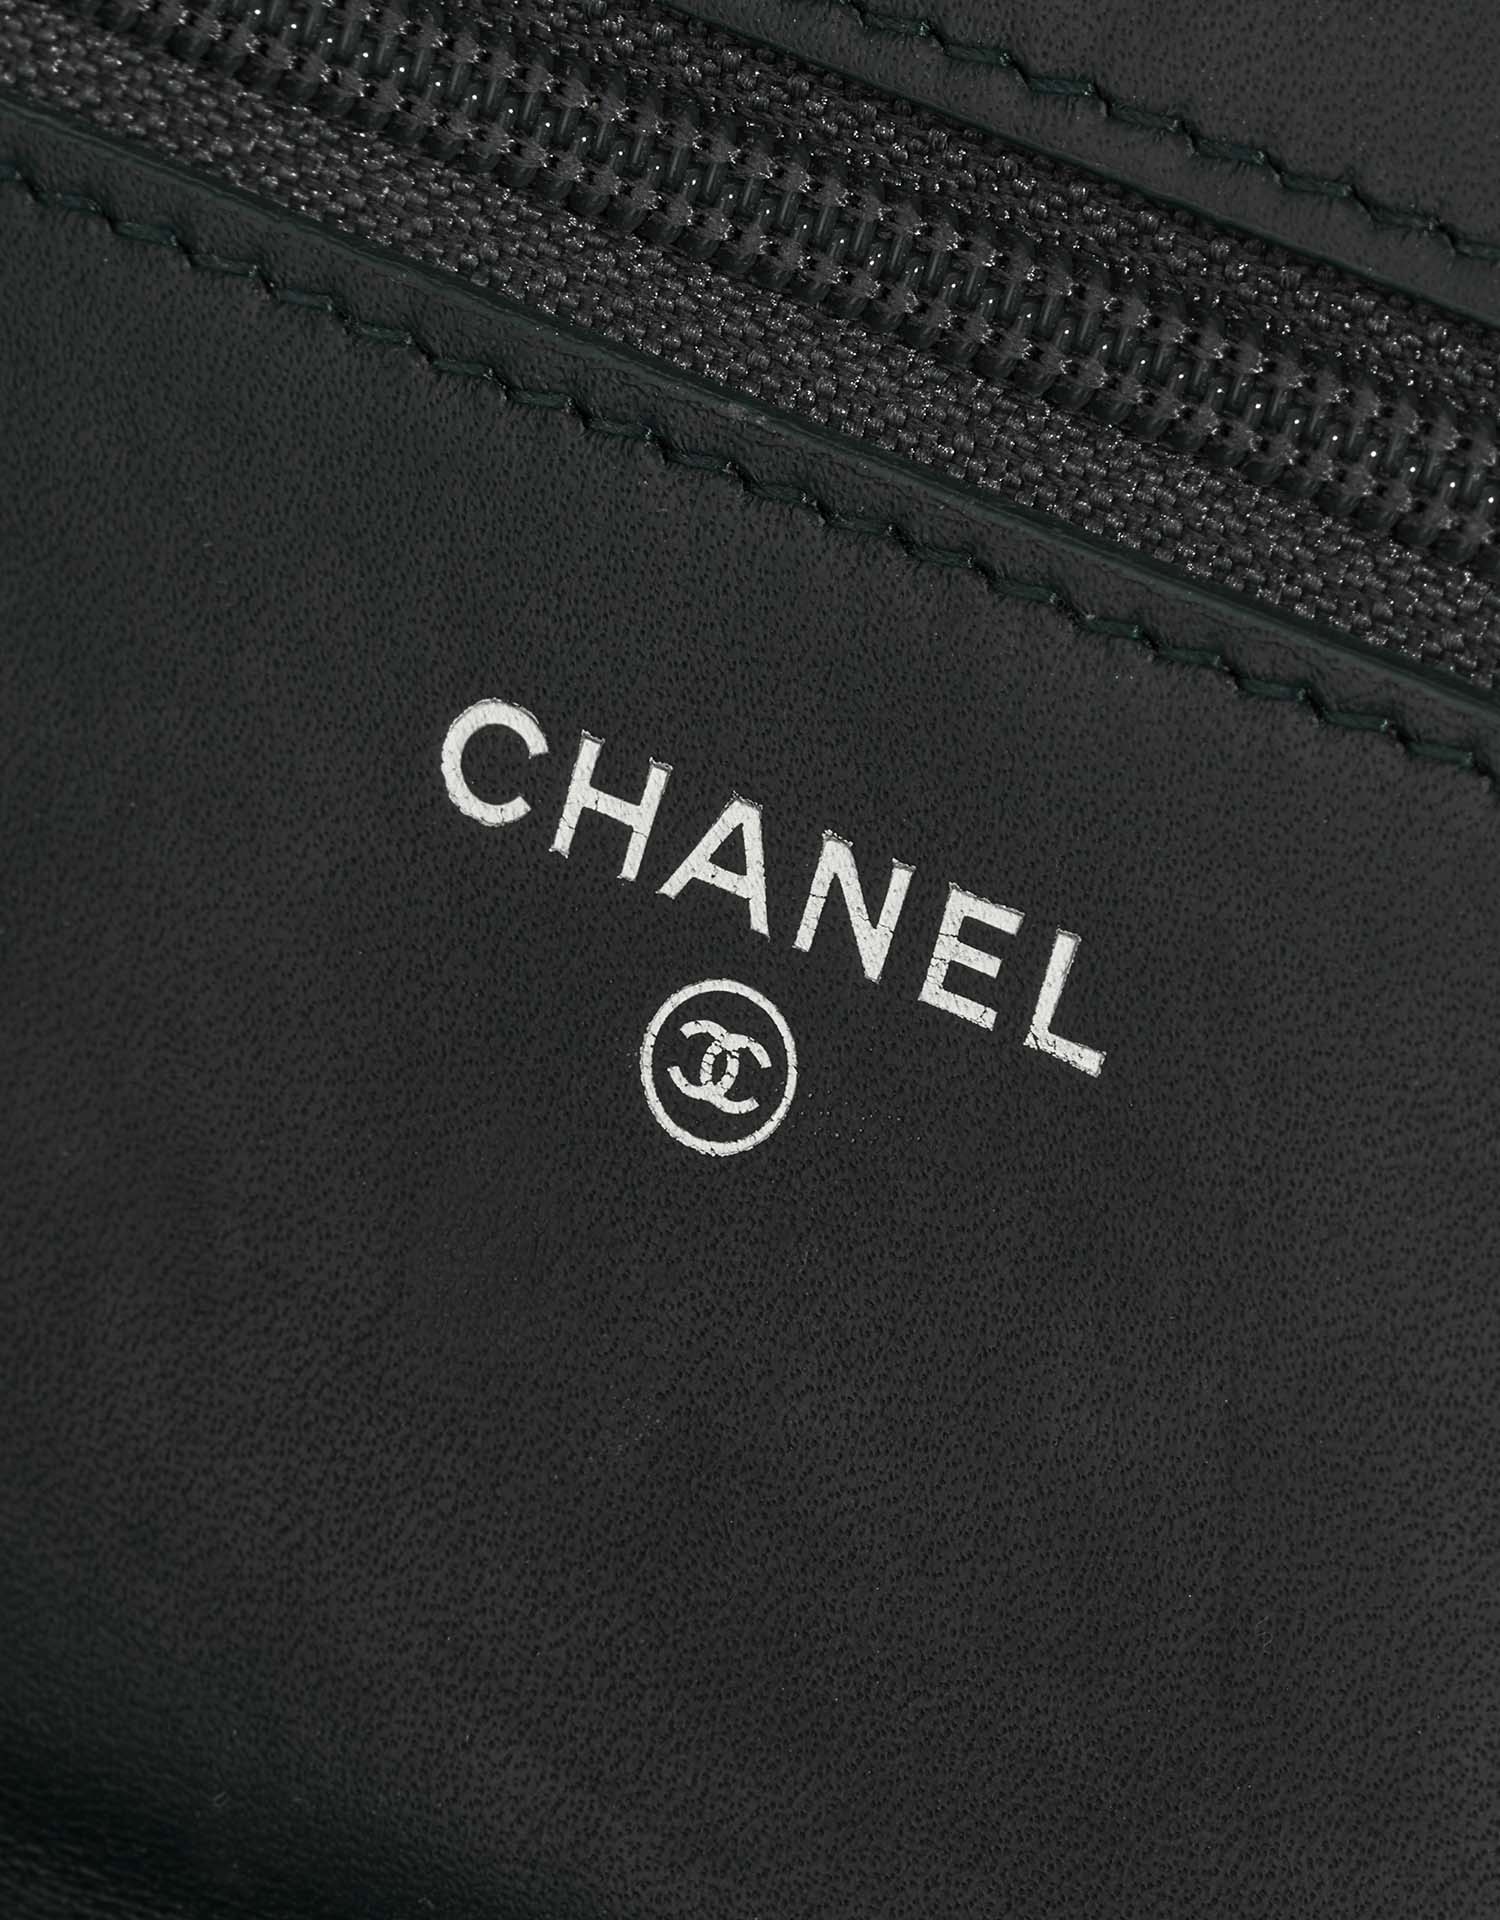 Chanel Timeless WOC Emerald Logo  | Sell your designer bag on Saclab.com